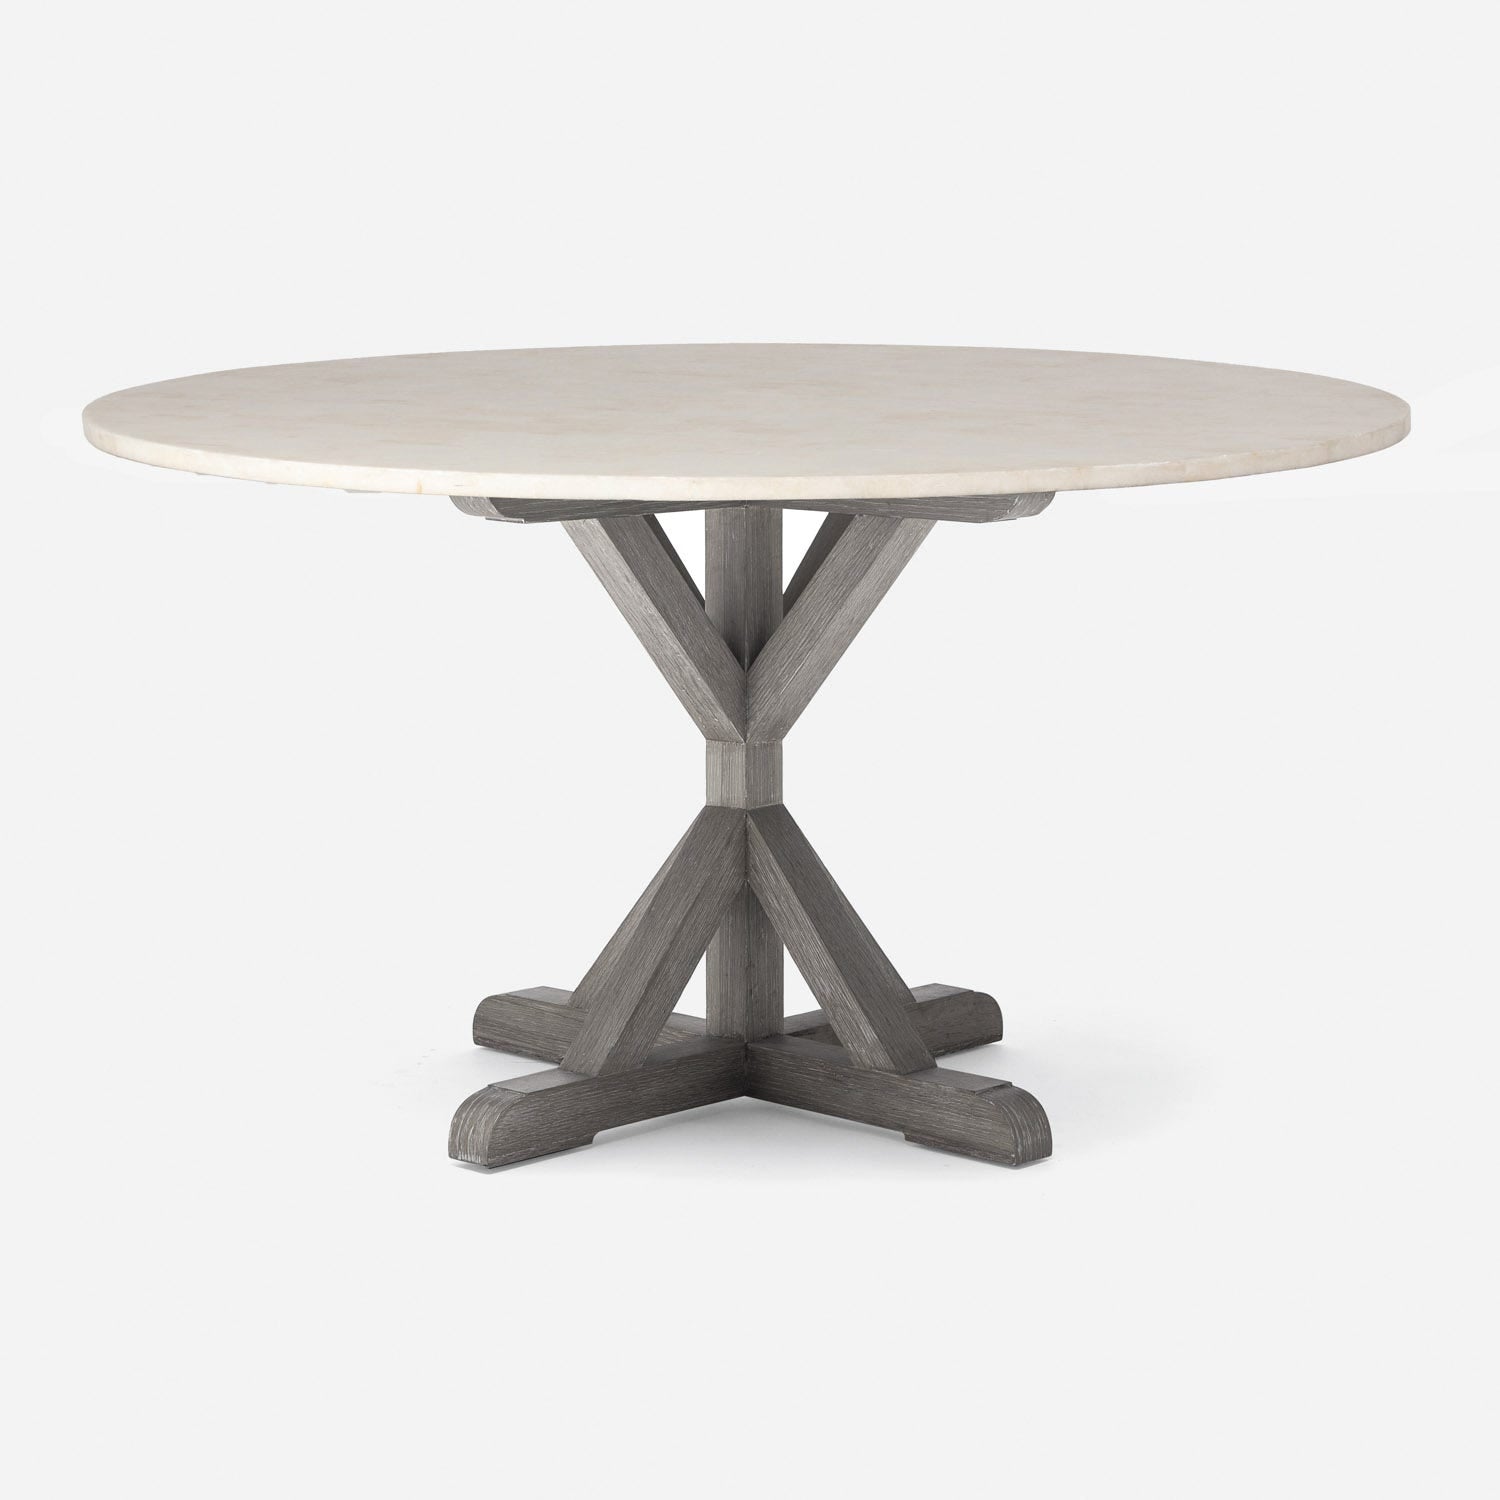 Made Goods Dane 72" x 30" Gray Cerused Oak Dinning Table With Round Ice Crystal Stone Table Top